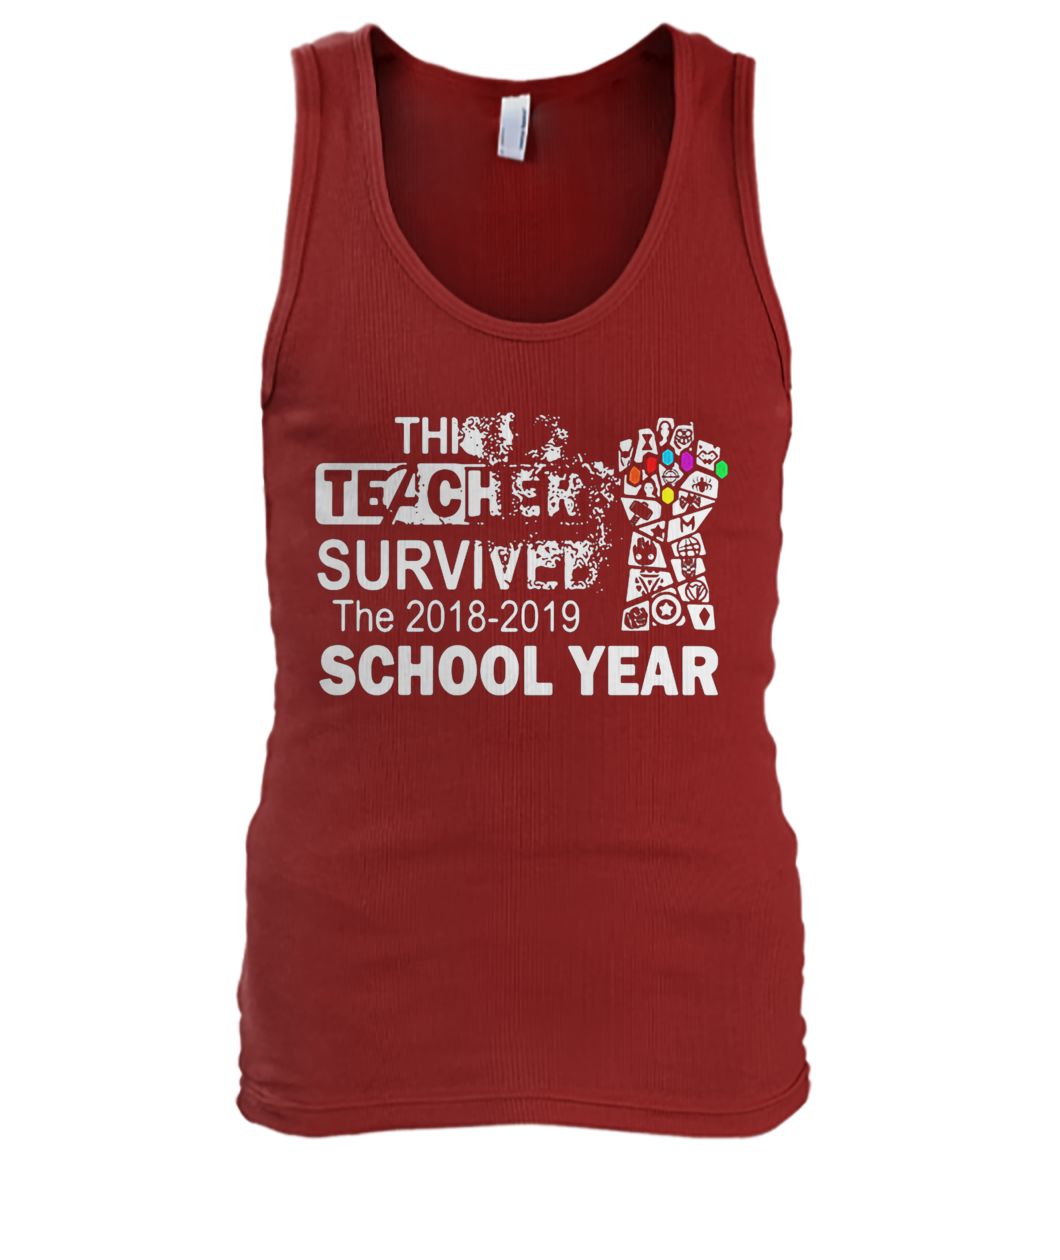 The infinity gauntlet avengers this teacher survived the 2018-2019 school year men's tank top